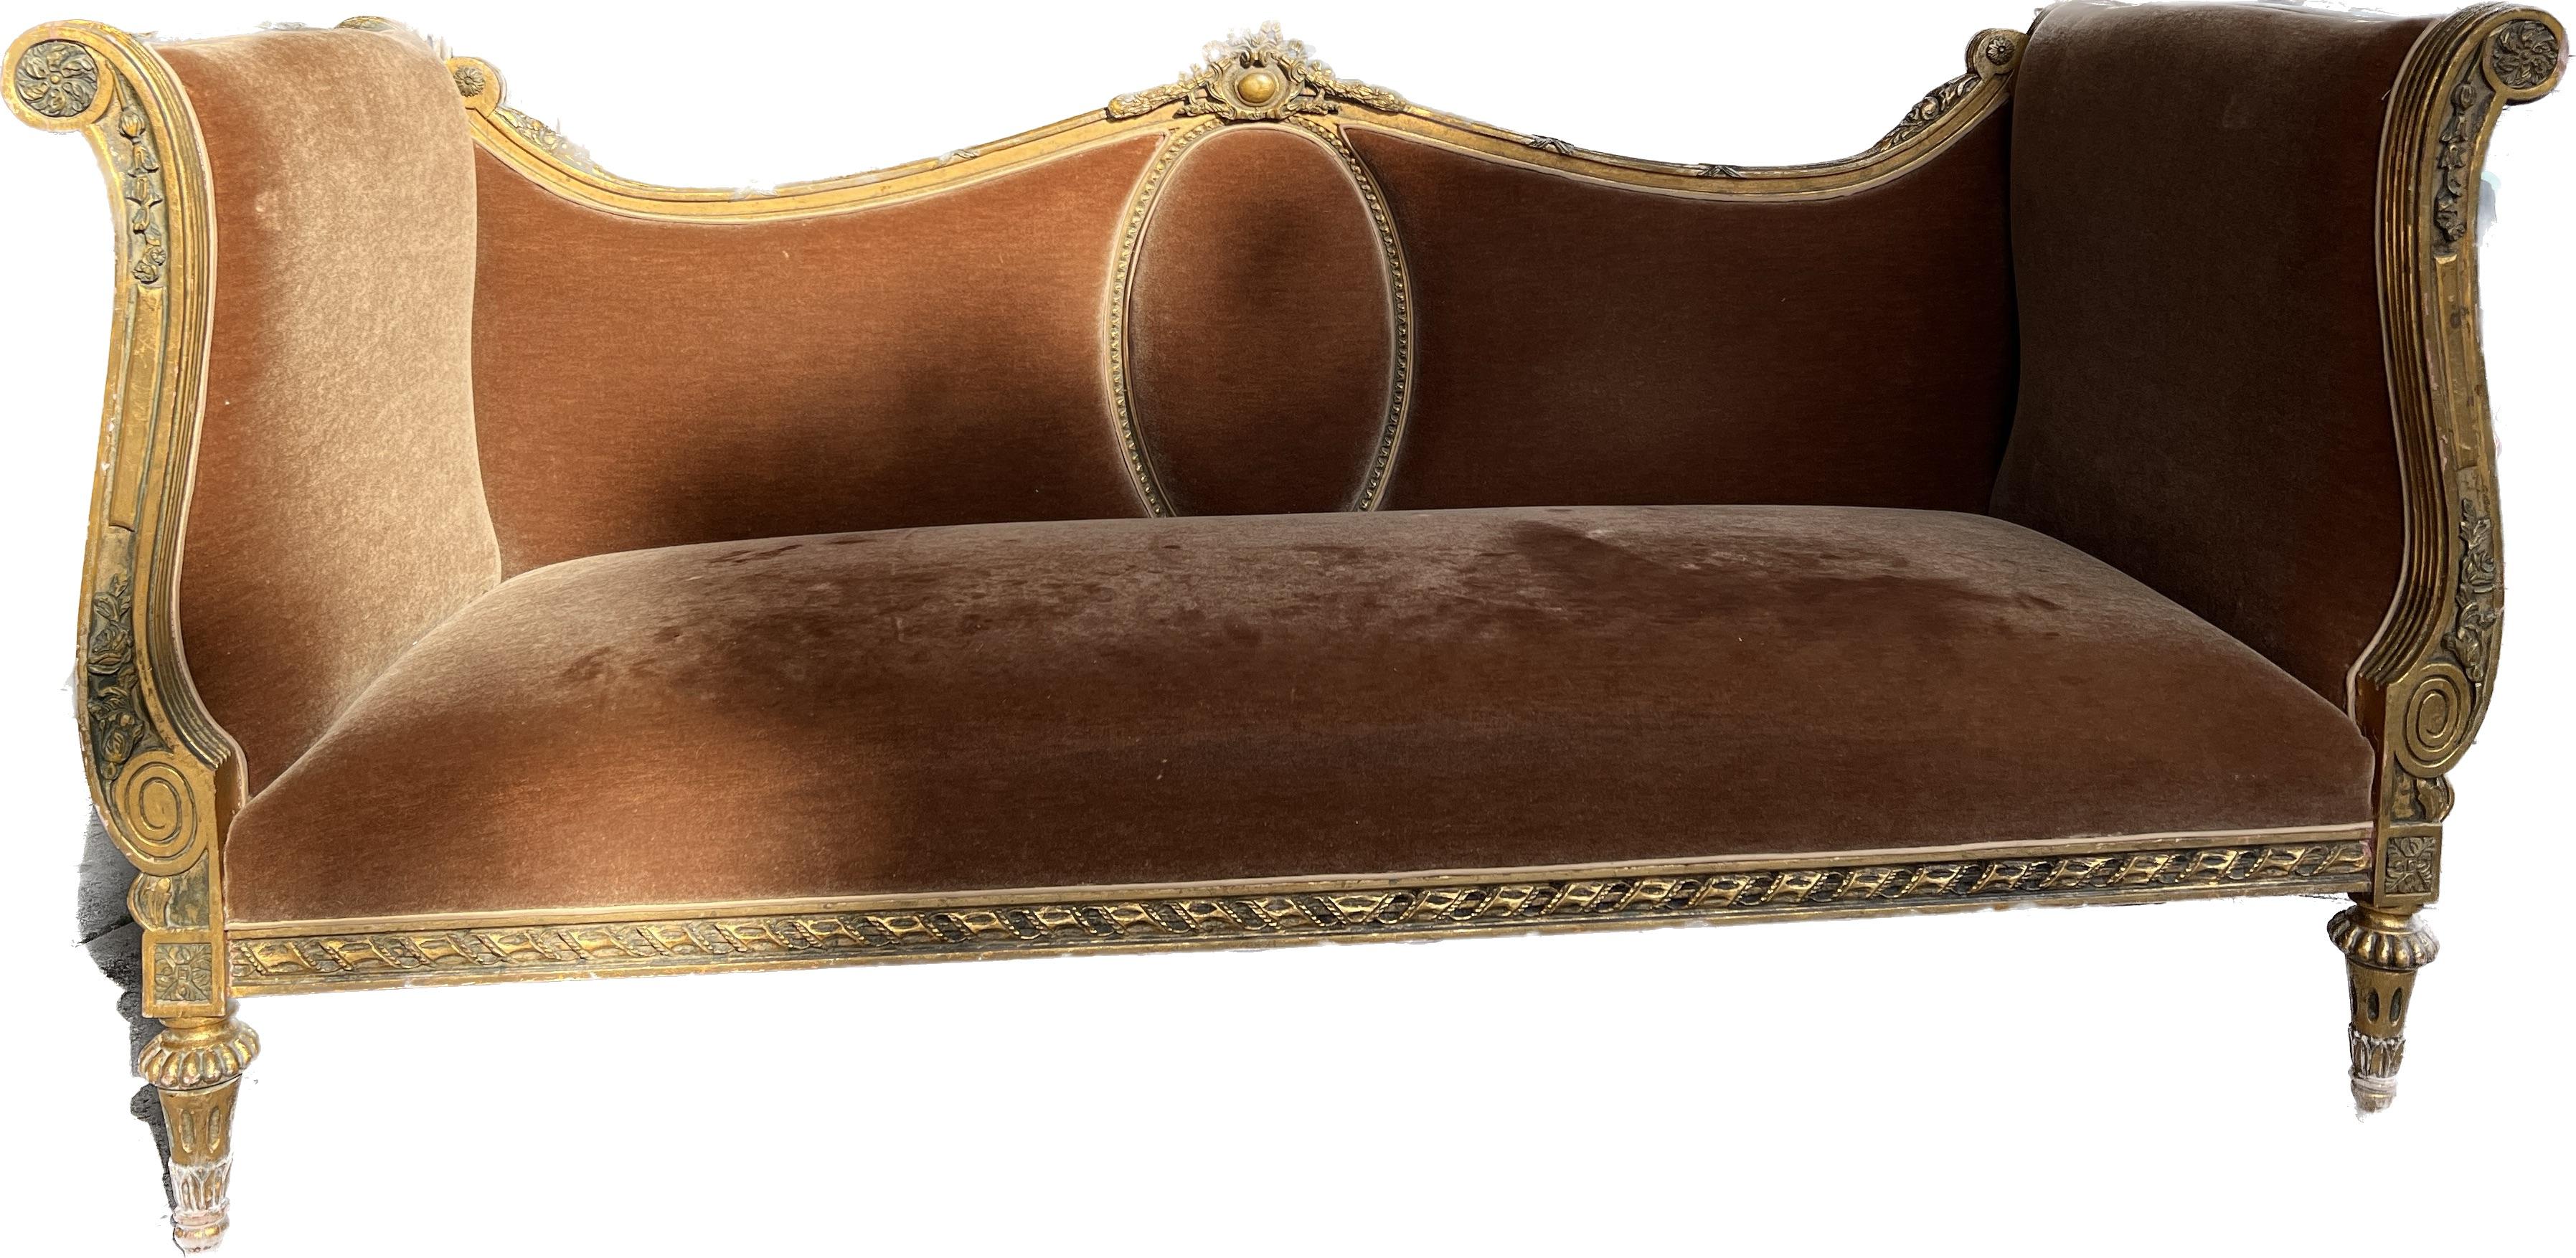 French style gilt wood couch, covered in mohair about 8 years ago. Metal ornaments.